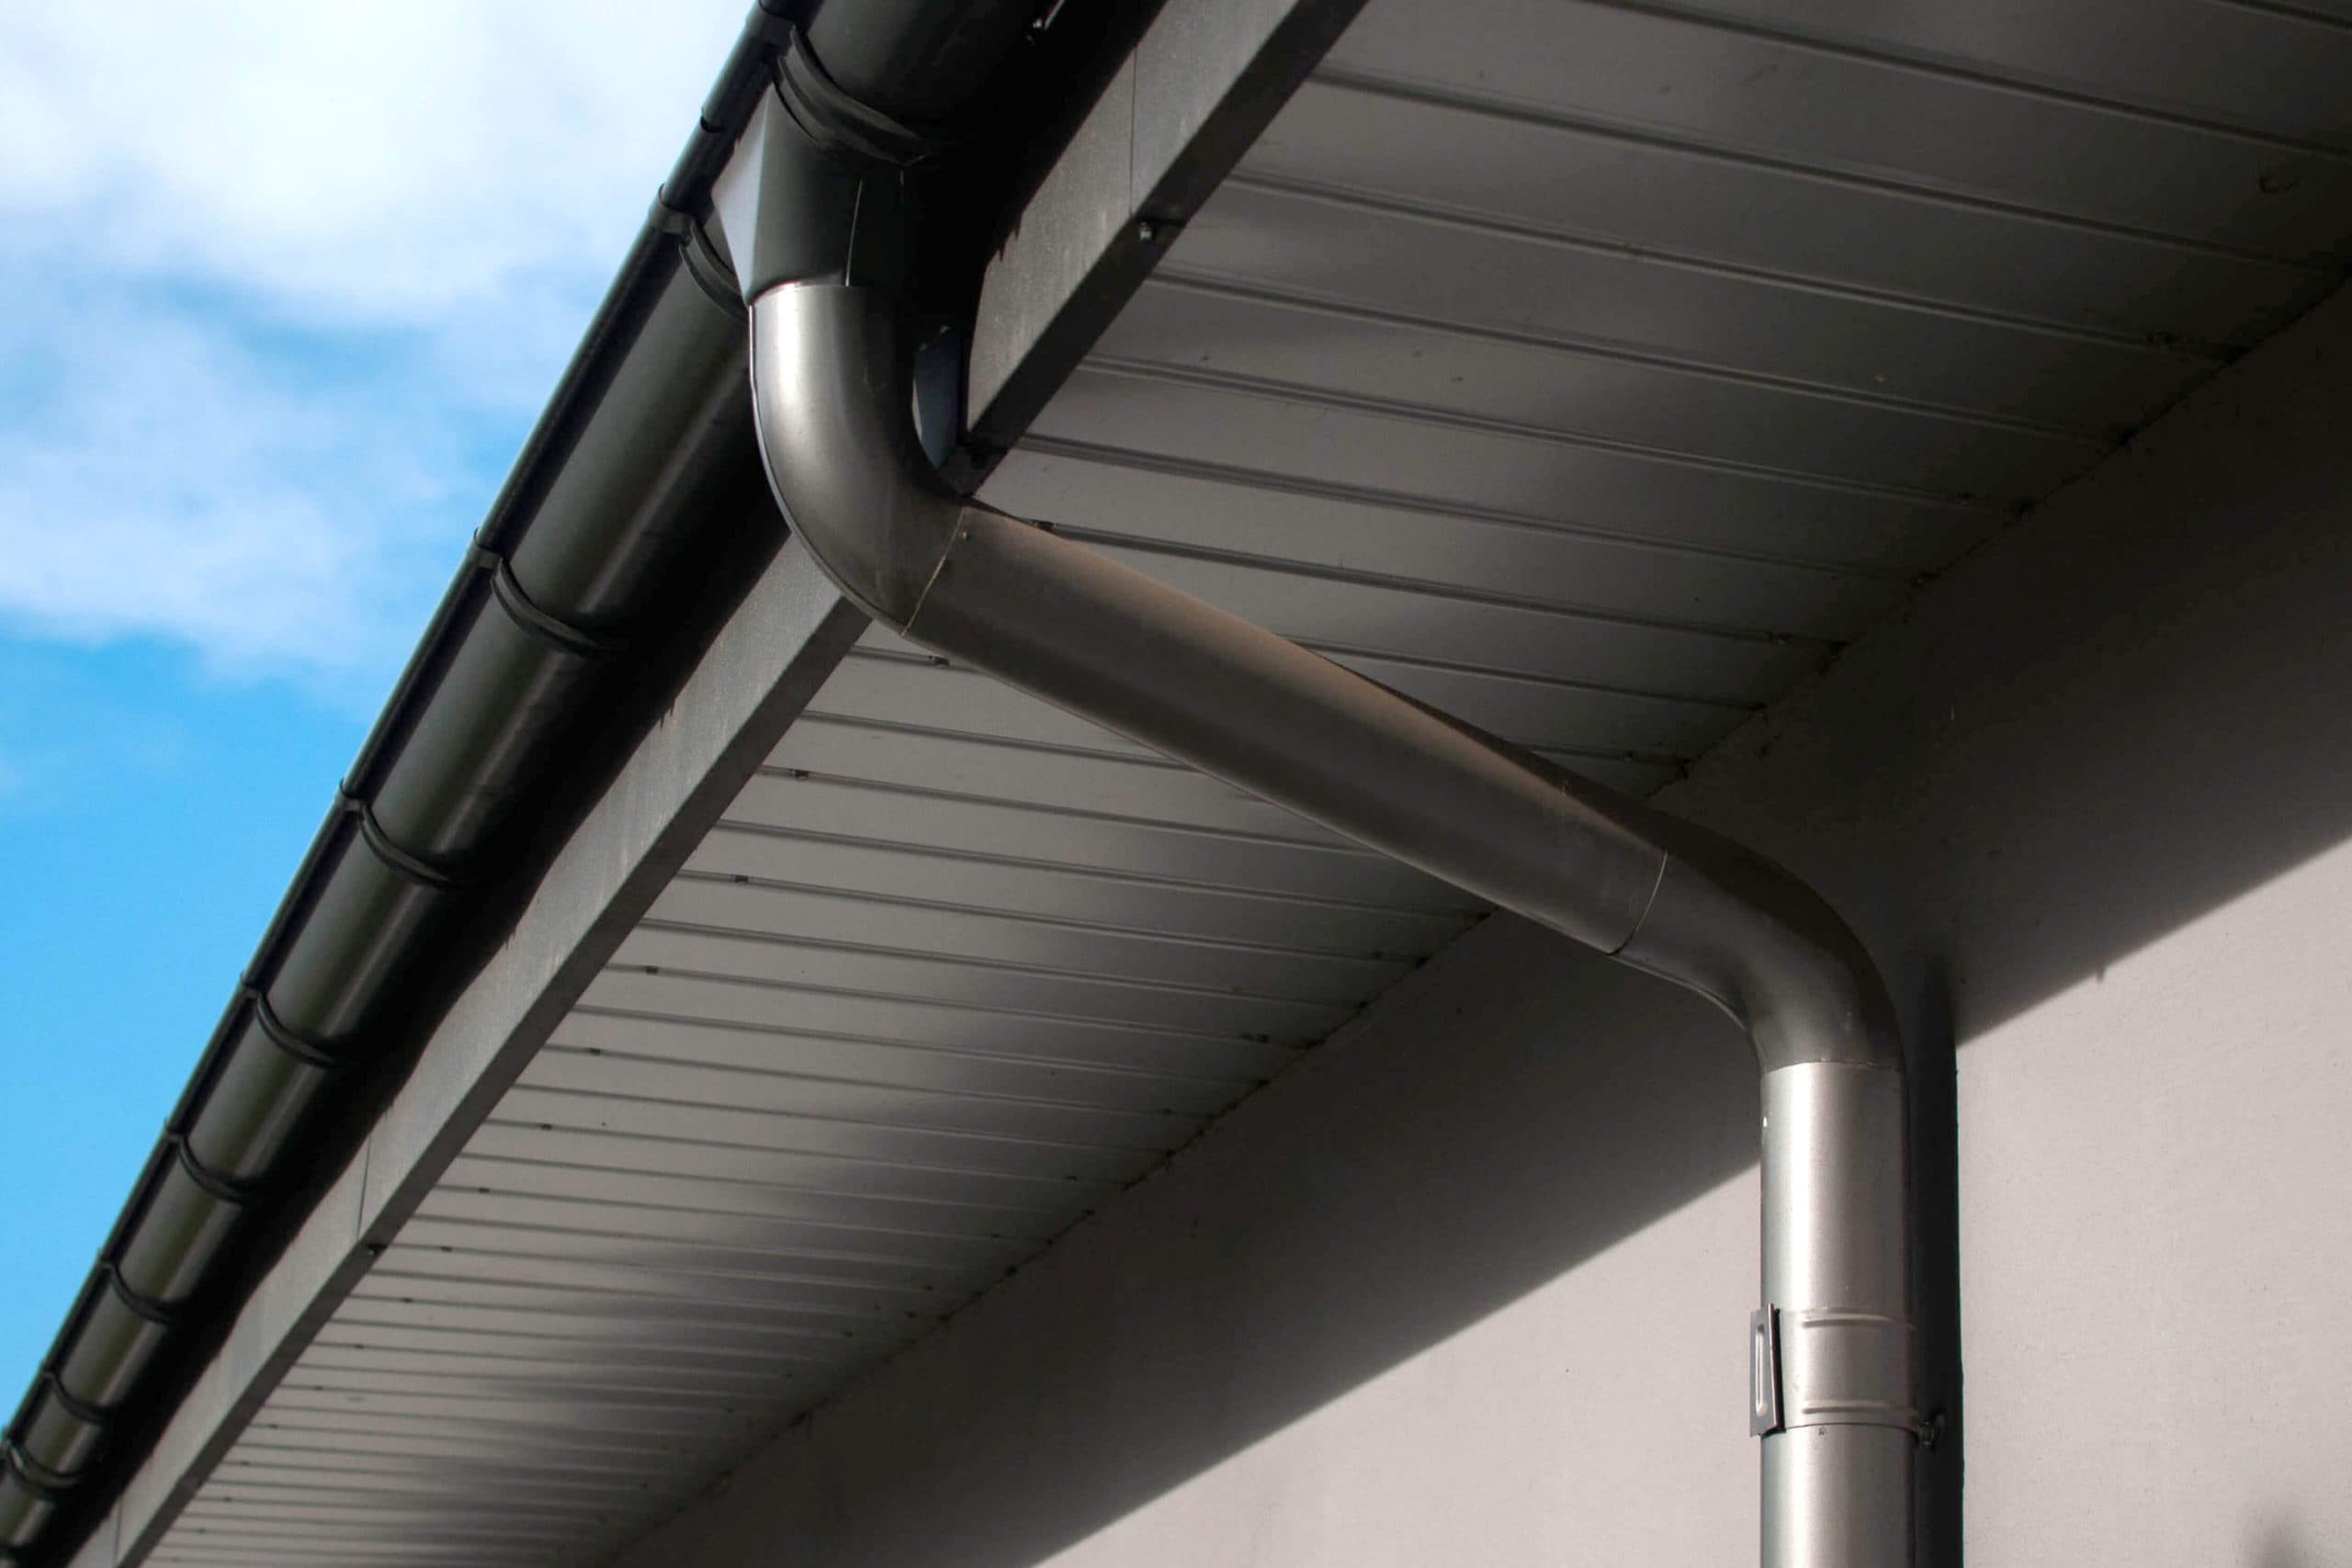 Corrosion-resistant galvanized gutters installed on a commercial building in Savannah